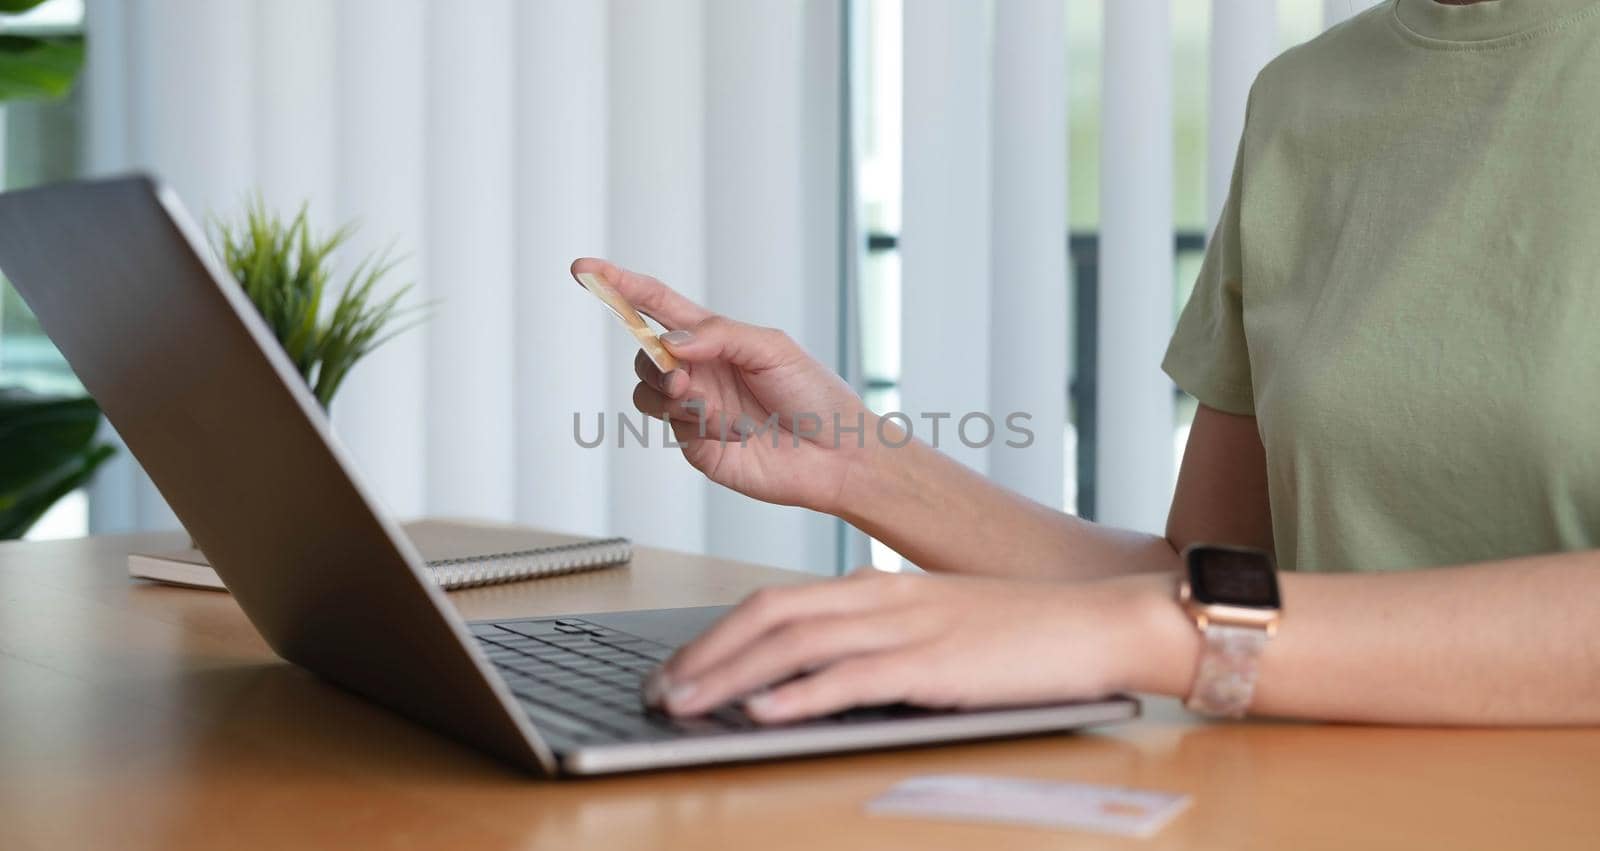 Online shopping. Young woman holding credit card and using laptop at home. African american girl working on computer at cafe. Business, e-commerce, internet banking, finance, freelance concept.